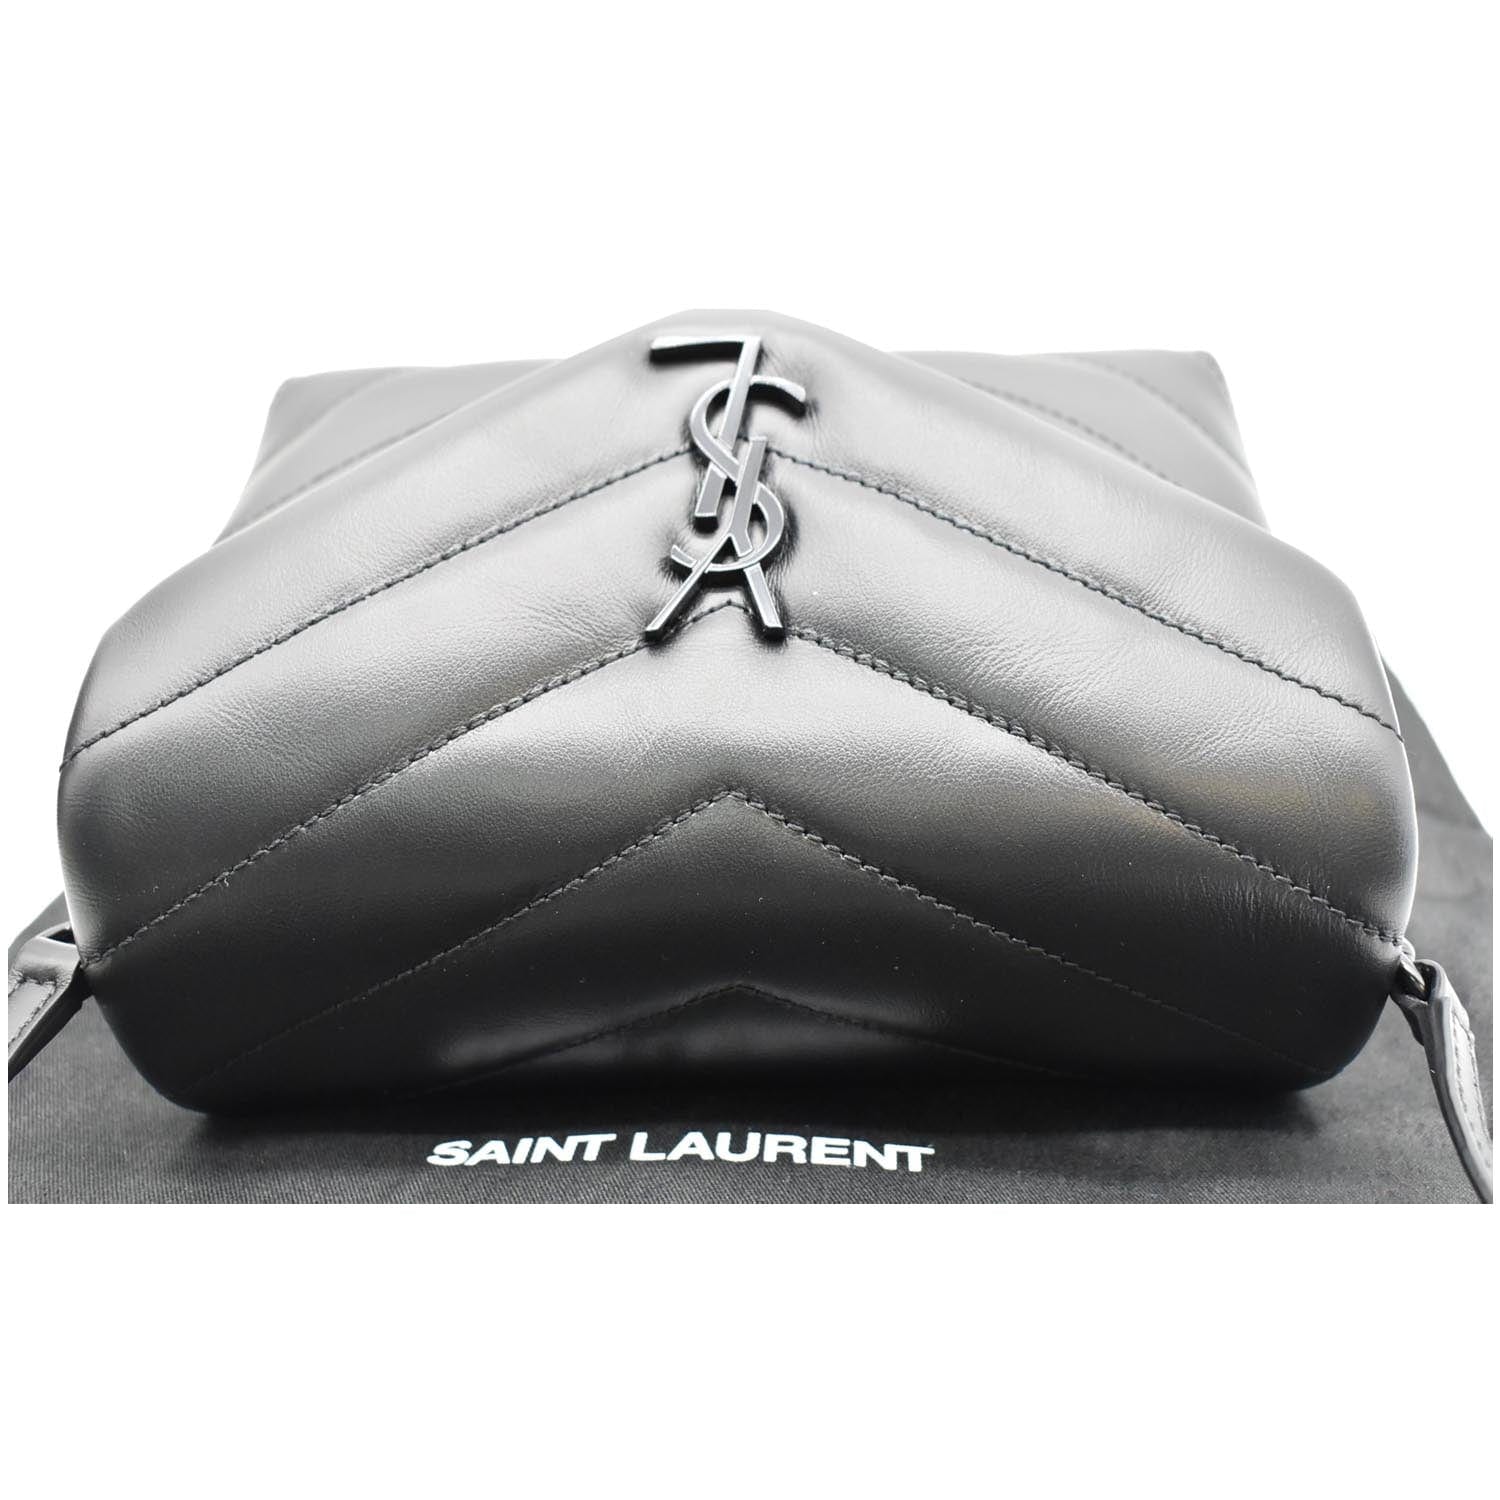 YVES SAINT LAURENT Loulou Puffer Toy Mini Bag Black Quilted